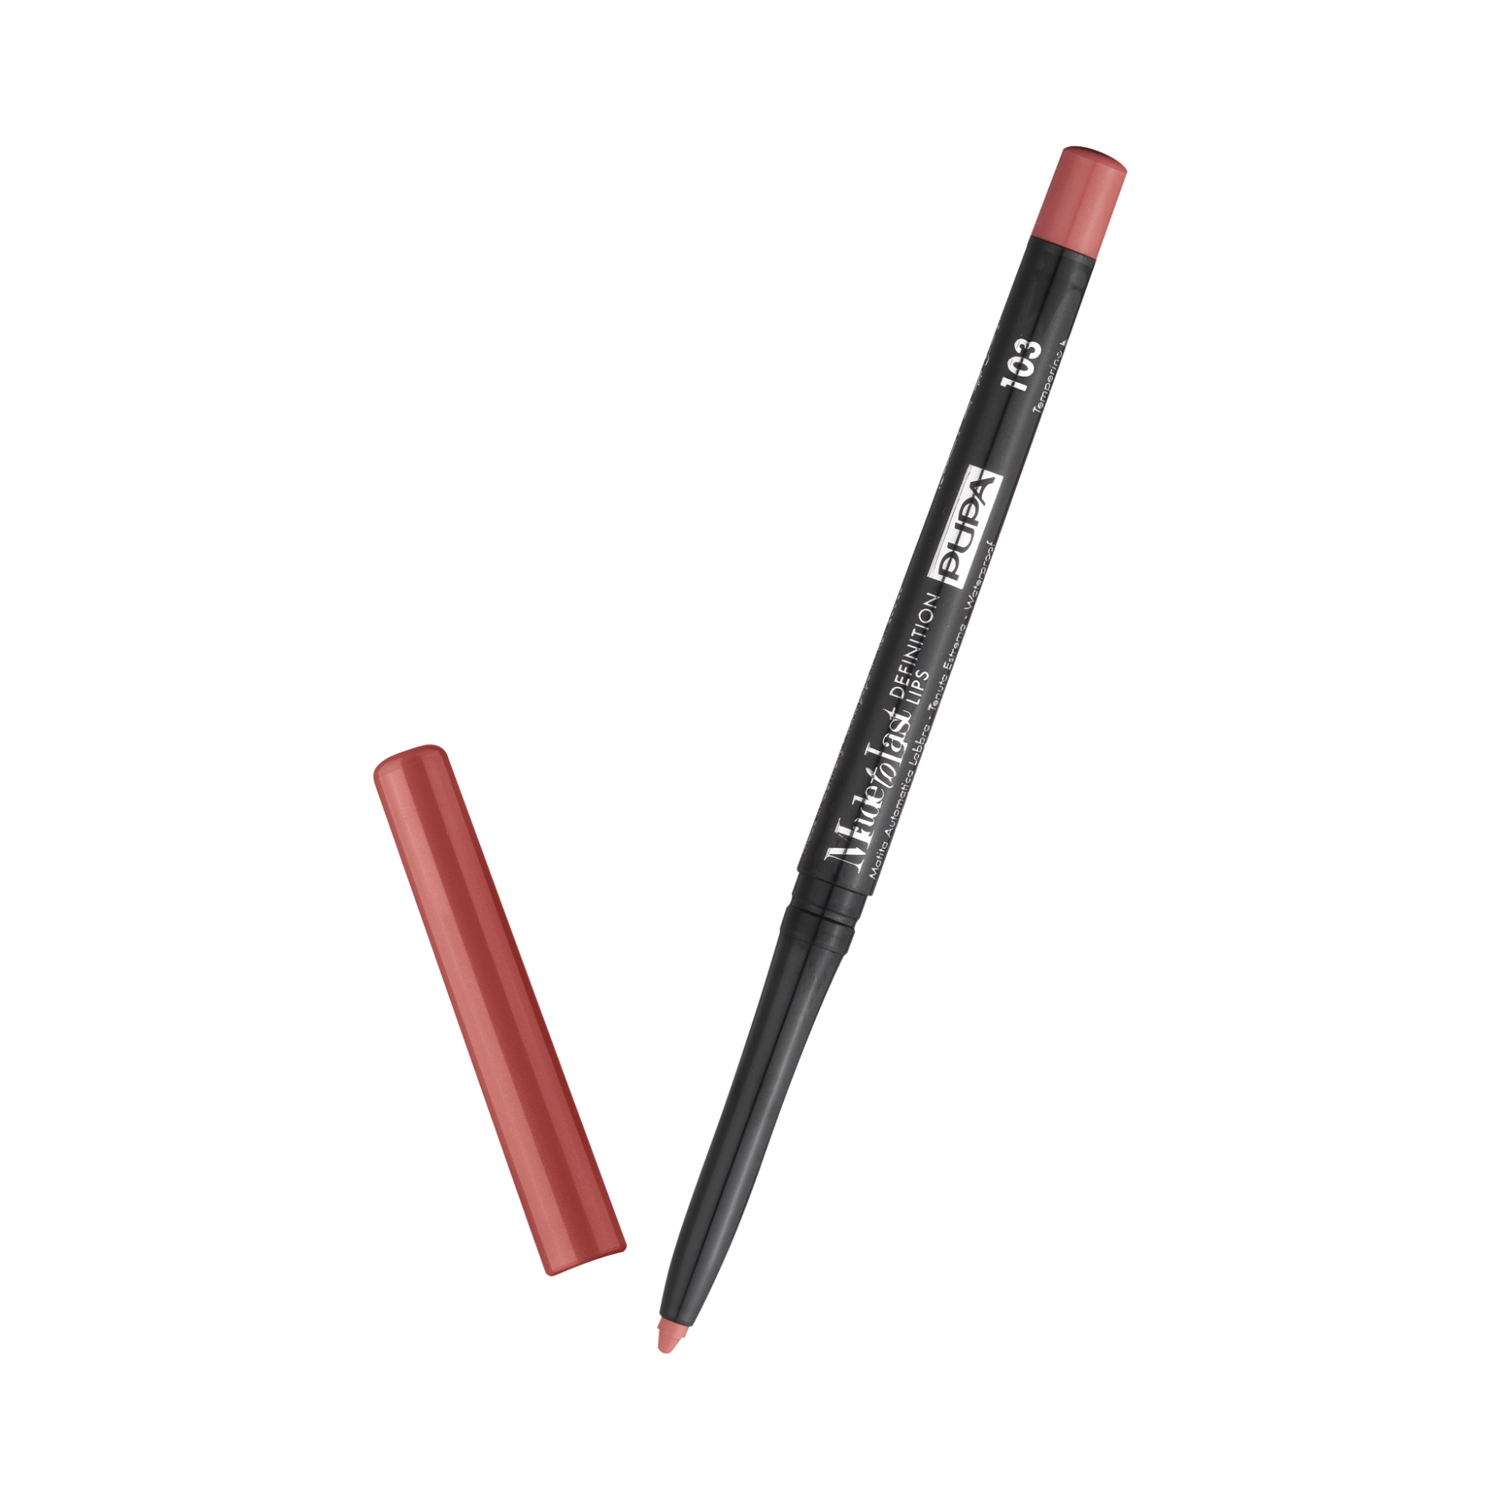 Pupa Milano Made To Last Definition Lip Pencil - 103 Apricot Rose (0.35g)